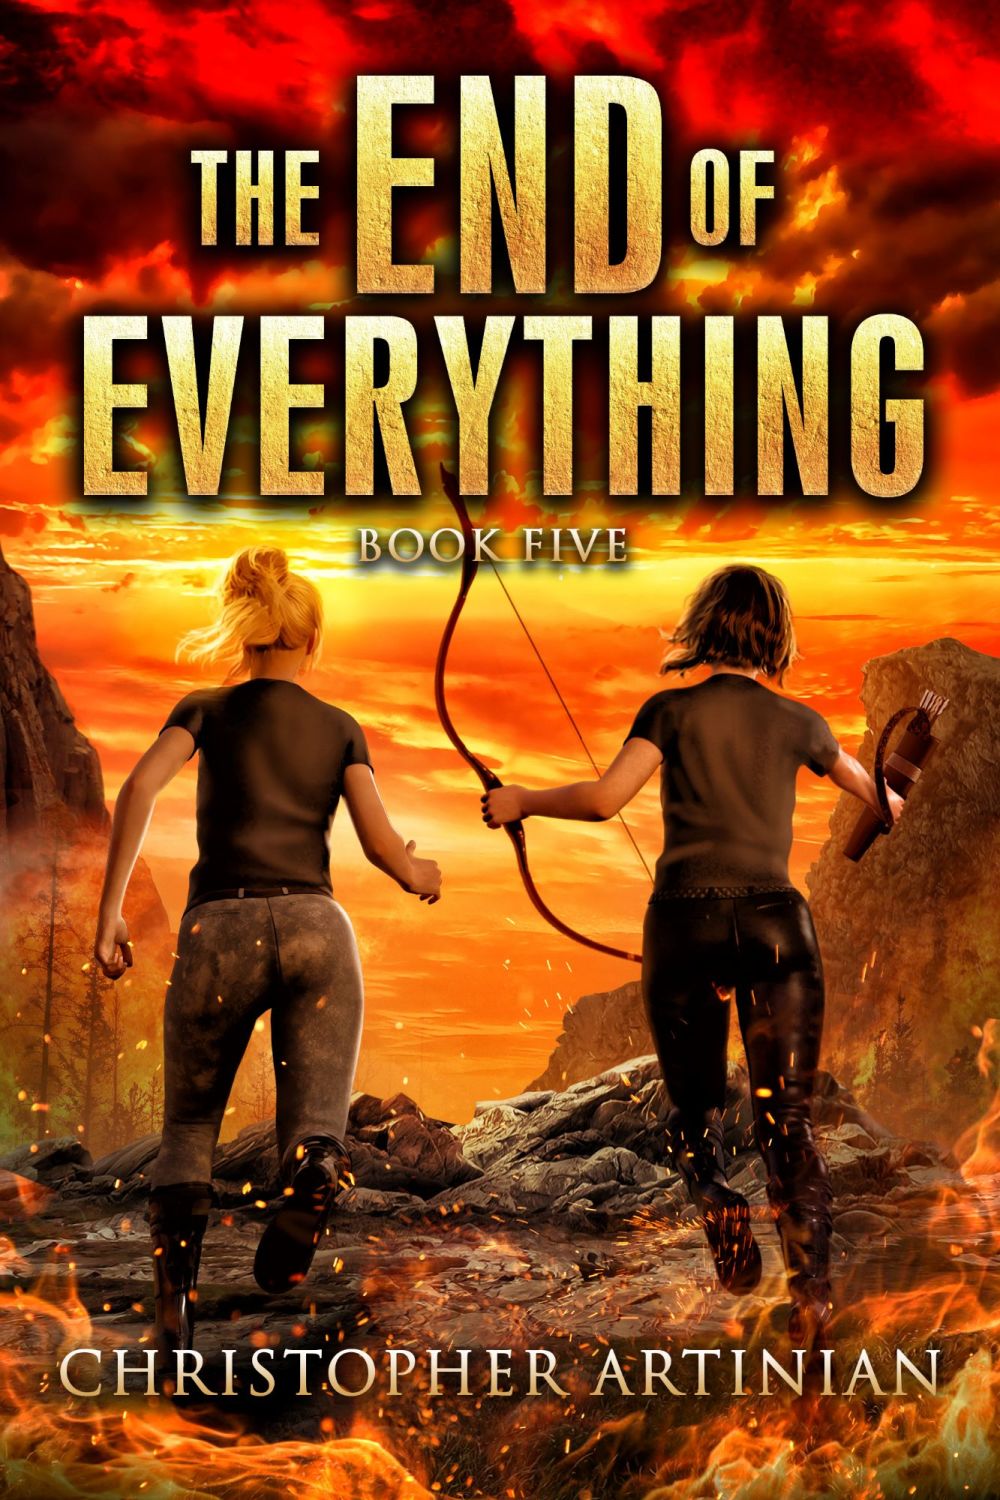 THE END OF EVERYTHING: BOOK 5 (SIGNED PAPERBACK)